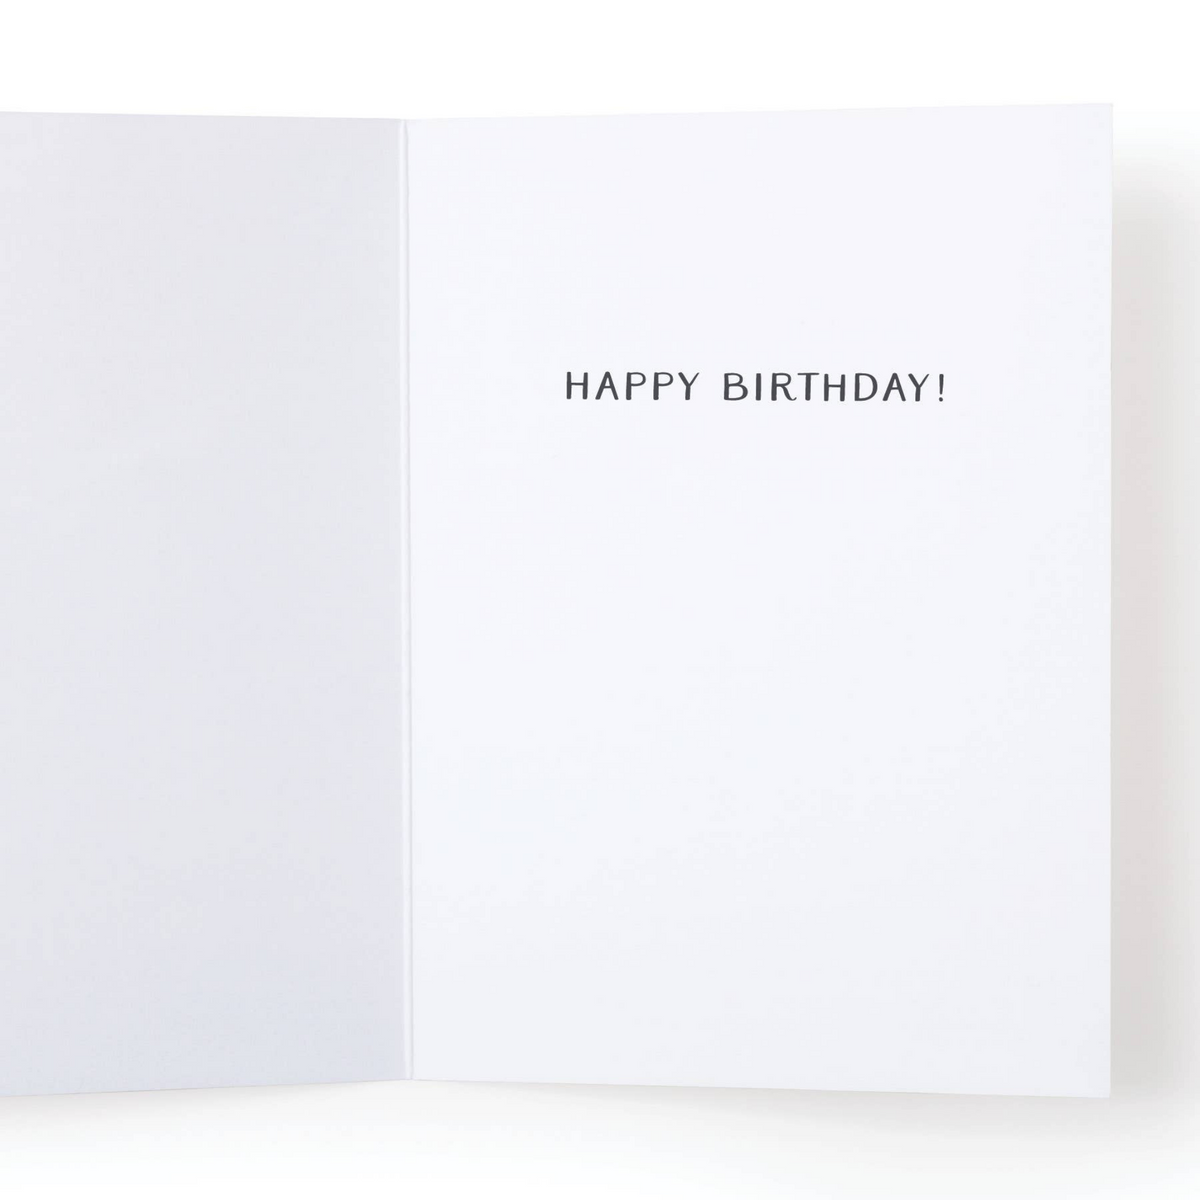 Aged to Perfection Birthday Card